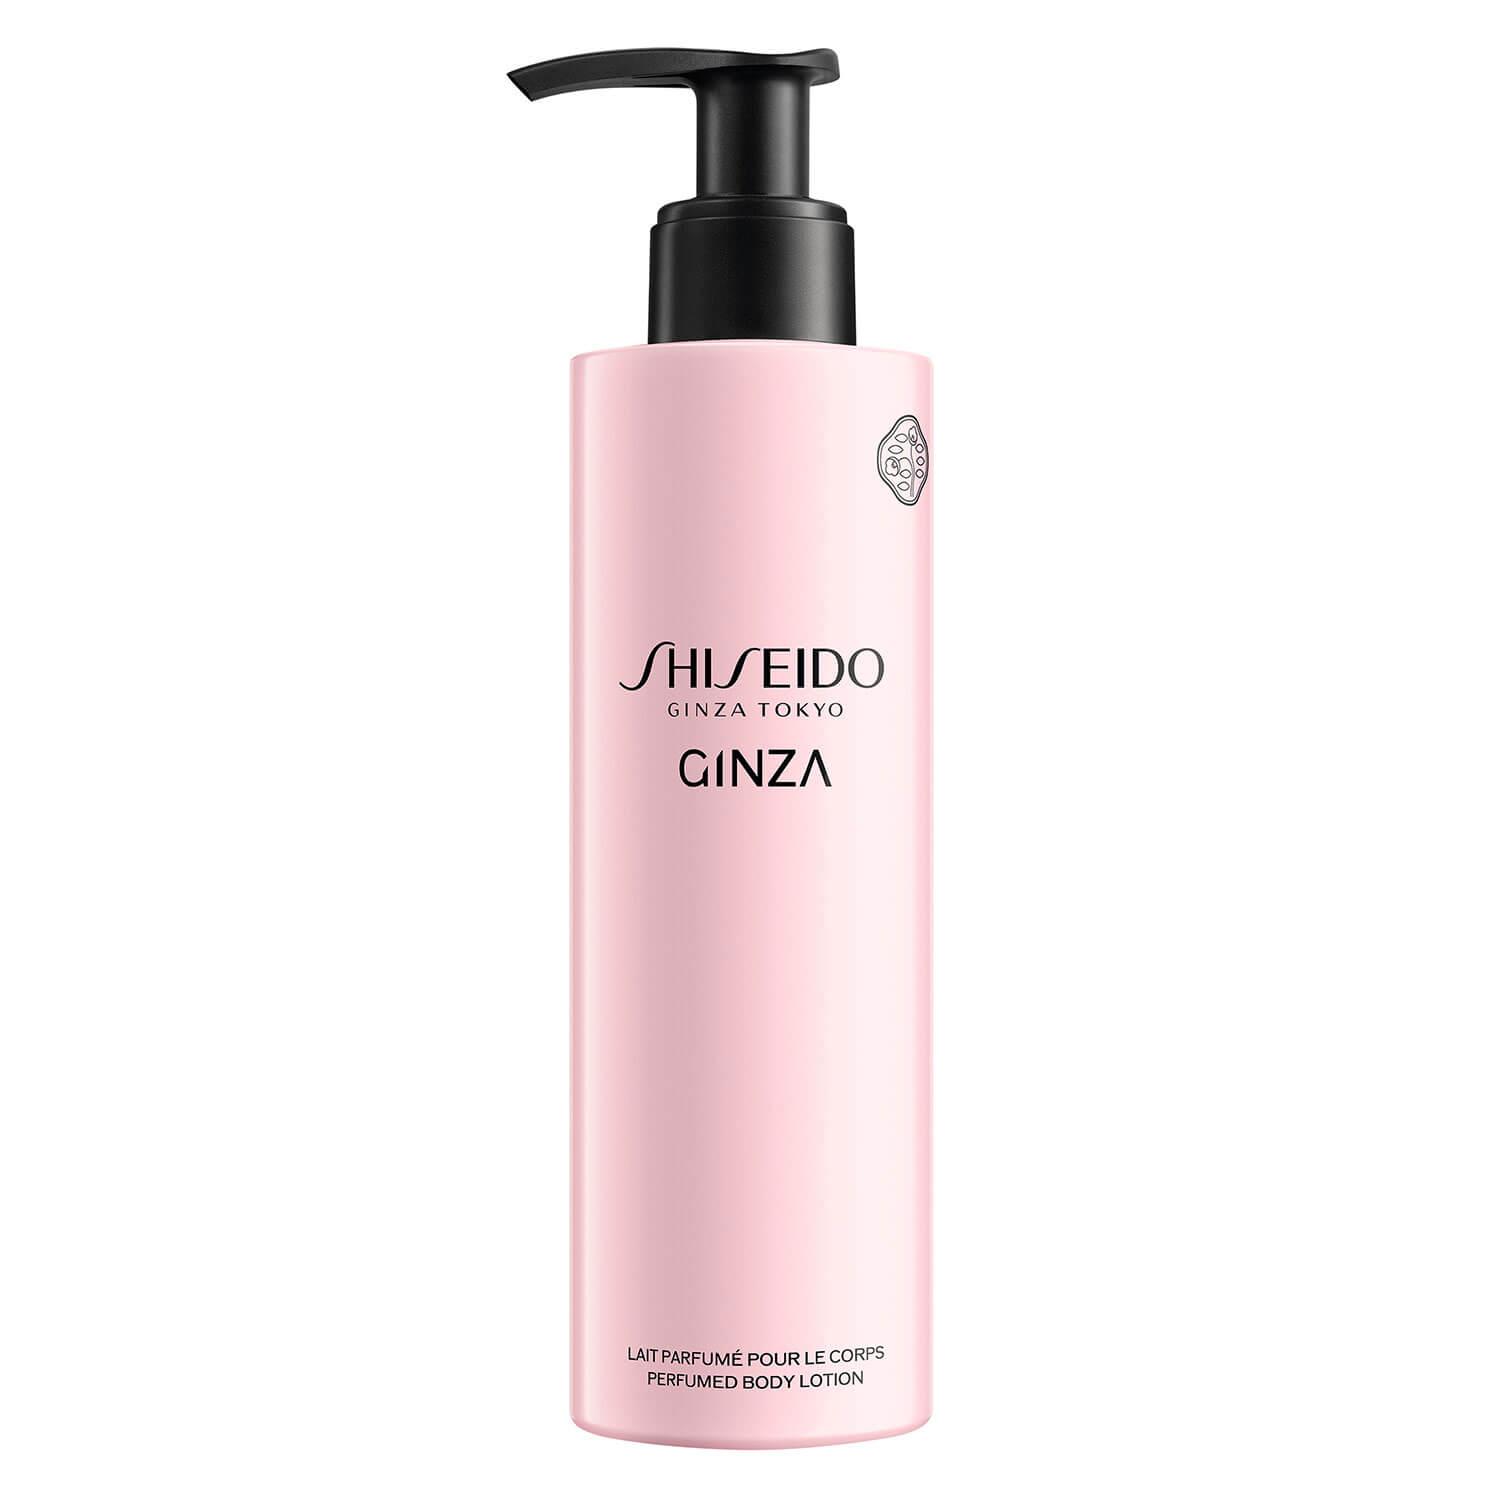 Ginza - Perfumed Body Lotion